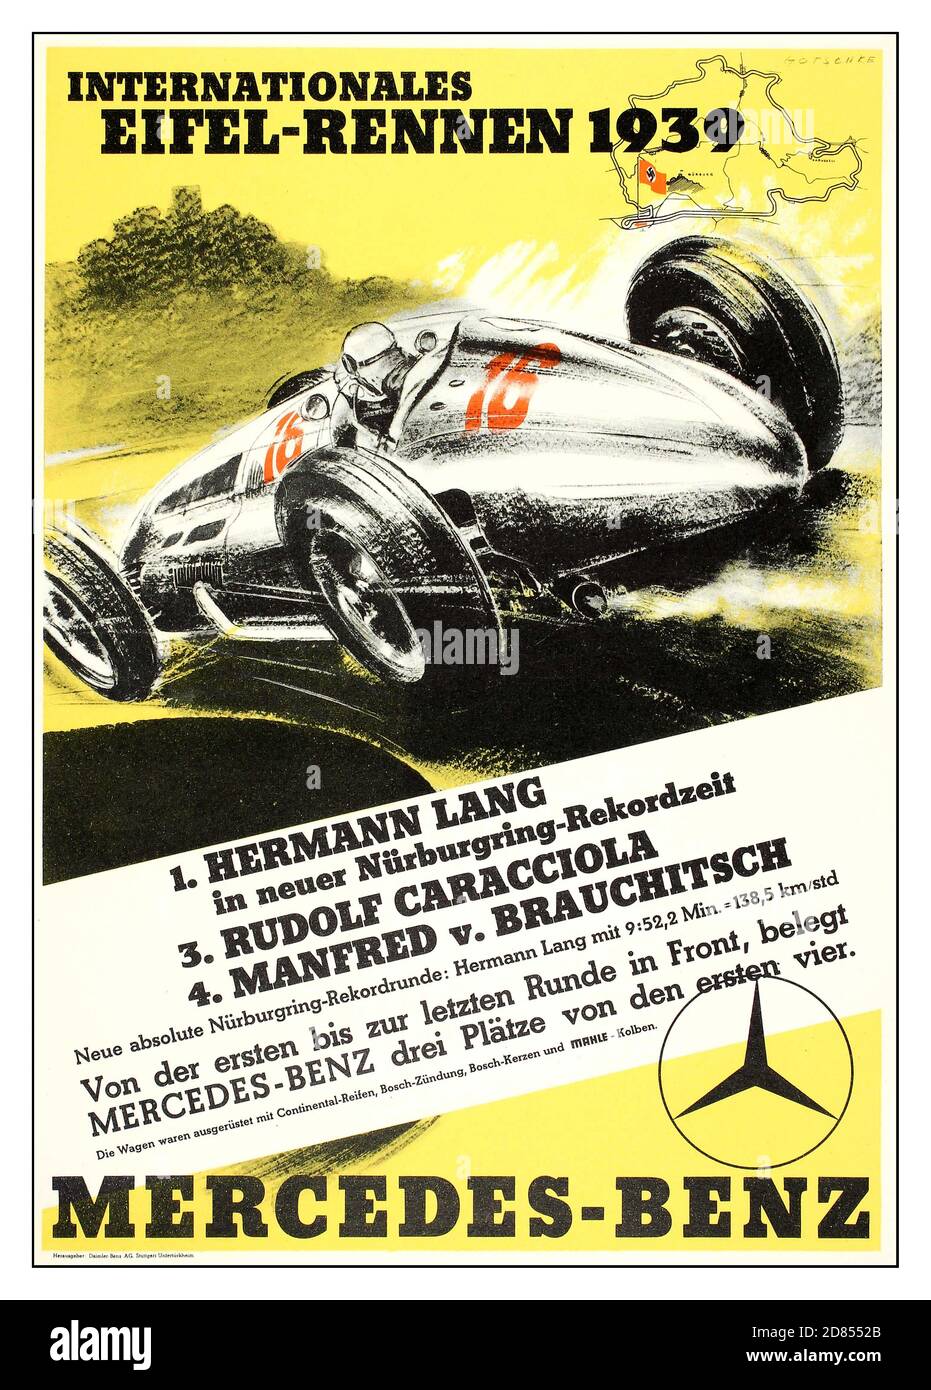 1939 Vintage Mercedes Race poster Internationales Eifel-Rennen 1939 - Mercedes Benz motor racing poster.  vintage motorsport poster intage 1930’s German Motor Racing Poster with Nazi Swastika start-finish flag promoting Mercedes-Benz at the International Eifel race on the Nürburgring, featuring German race drivers Hermann Lang, Rudolph Caracciola and Manfred von Brauchitsch. The Eifelrennen was an annual motor race, organised by ADAC Automobile Club from 1922 to 2003, held in Germany's Eifel mountain region even before the Nürburgring was built there. Artwork Designer: Gotschke Stock Photo